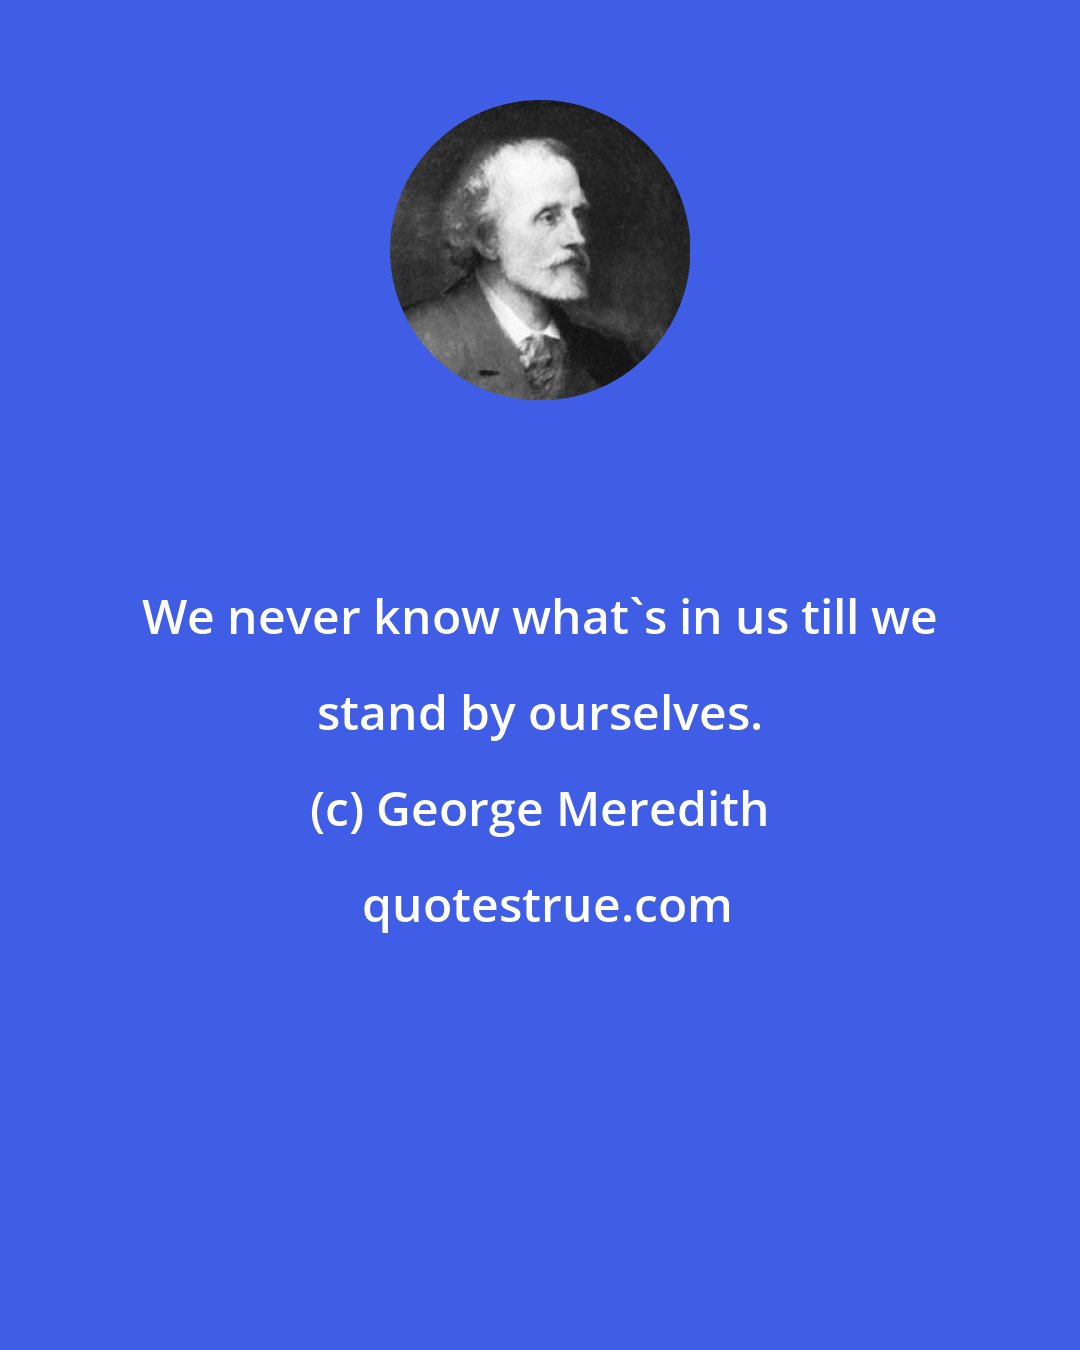 George Meredith: We never know what's in us till we stand by ourselves.